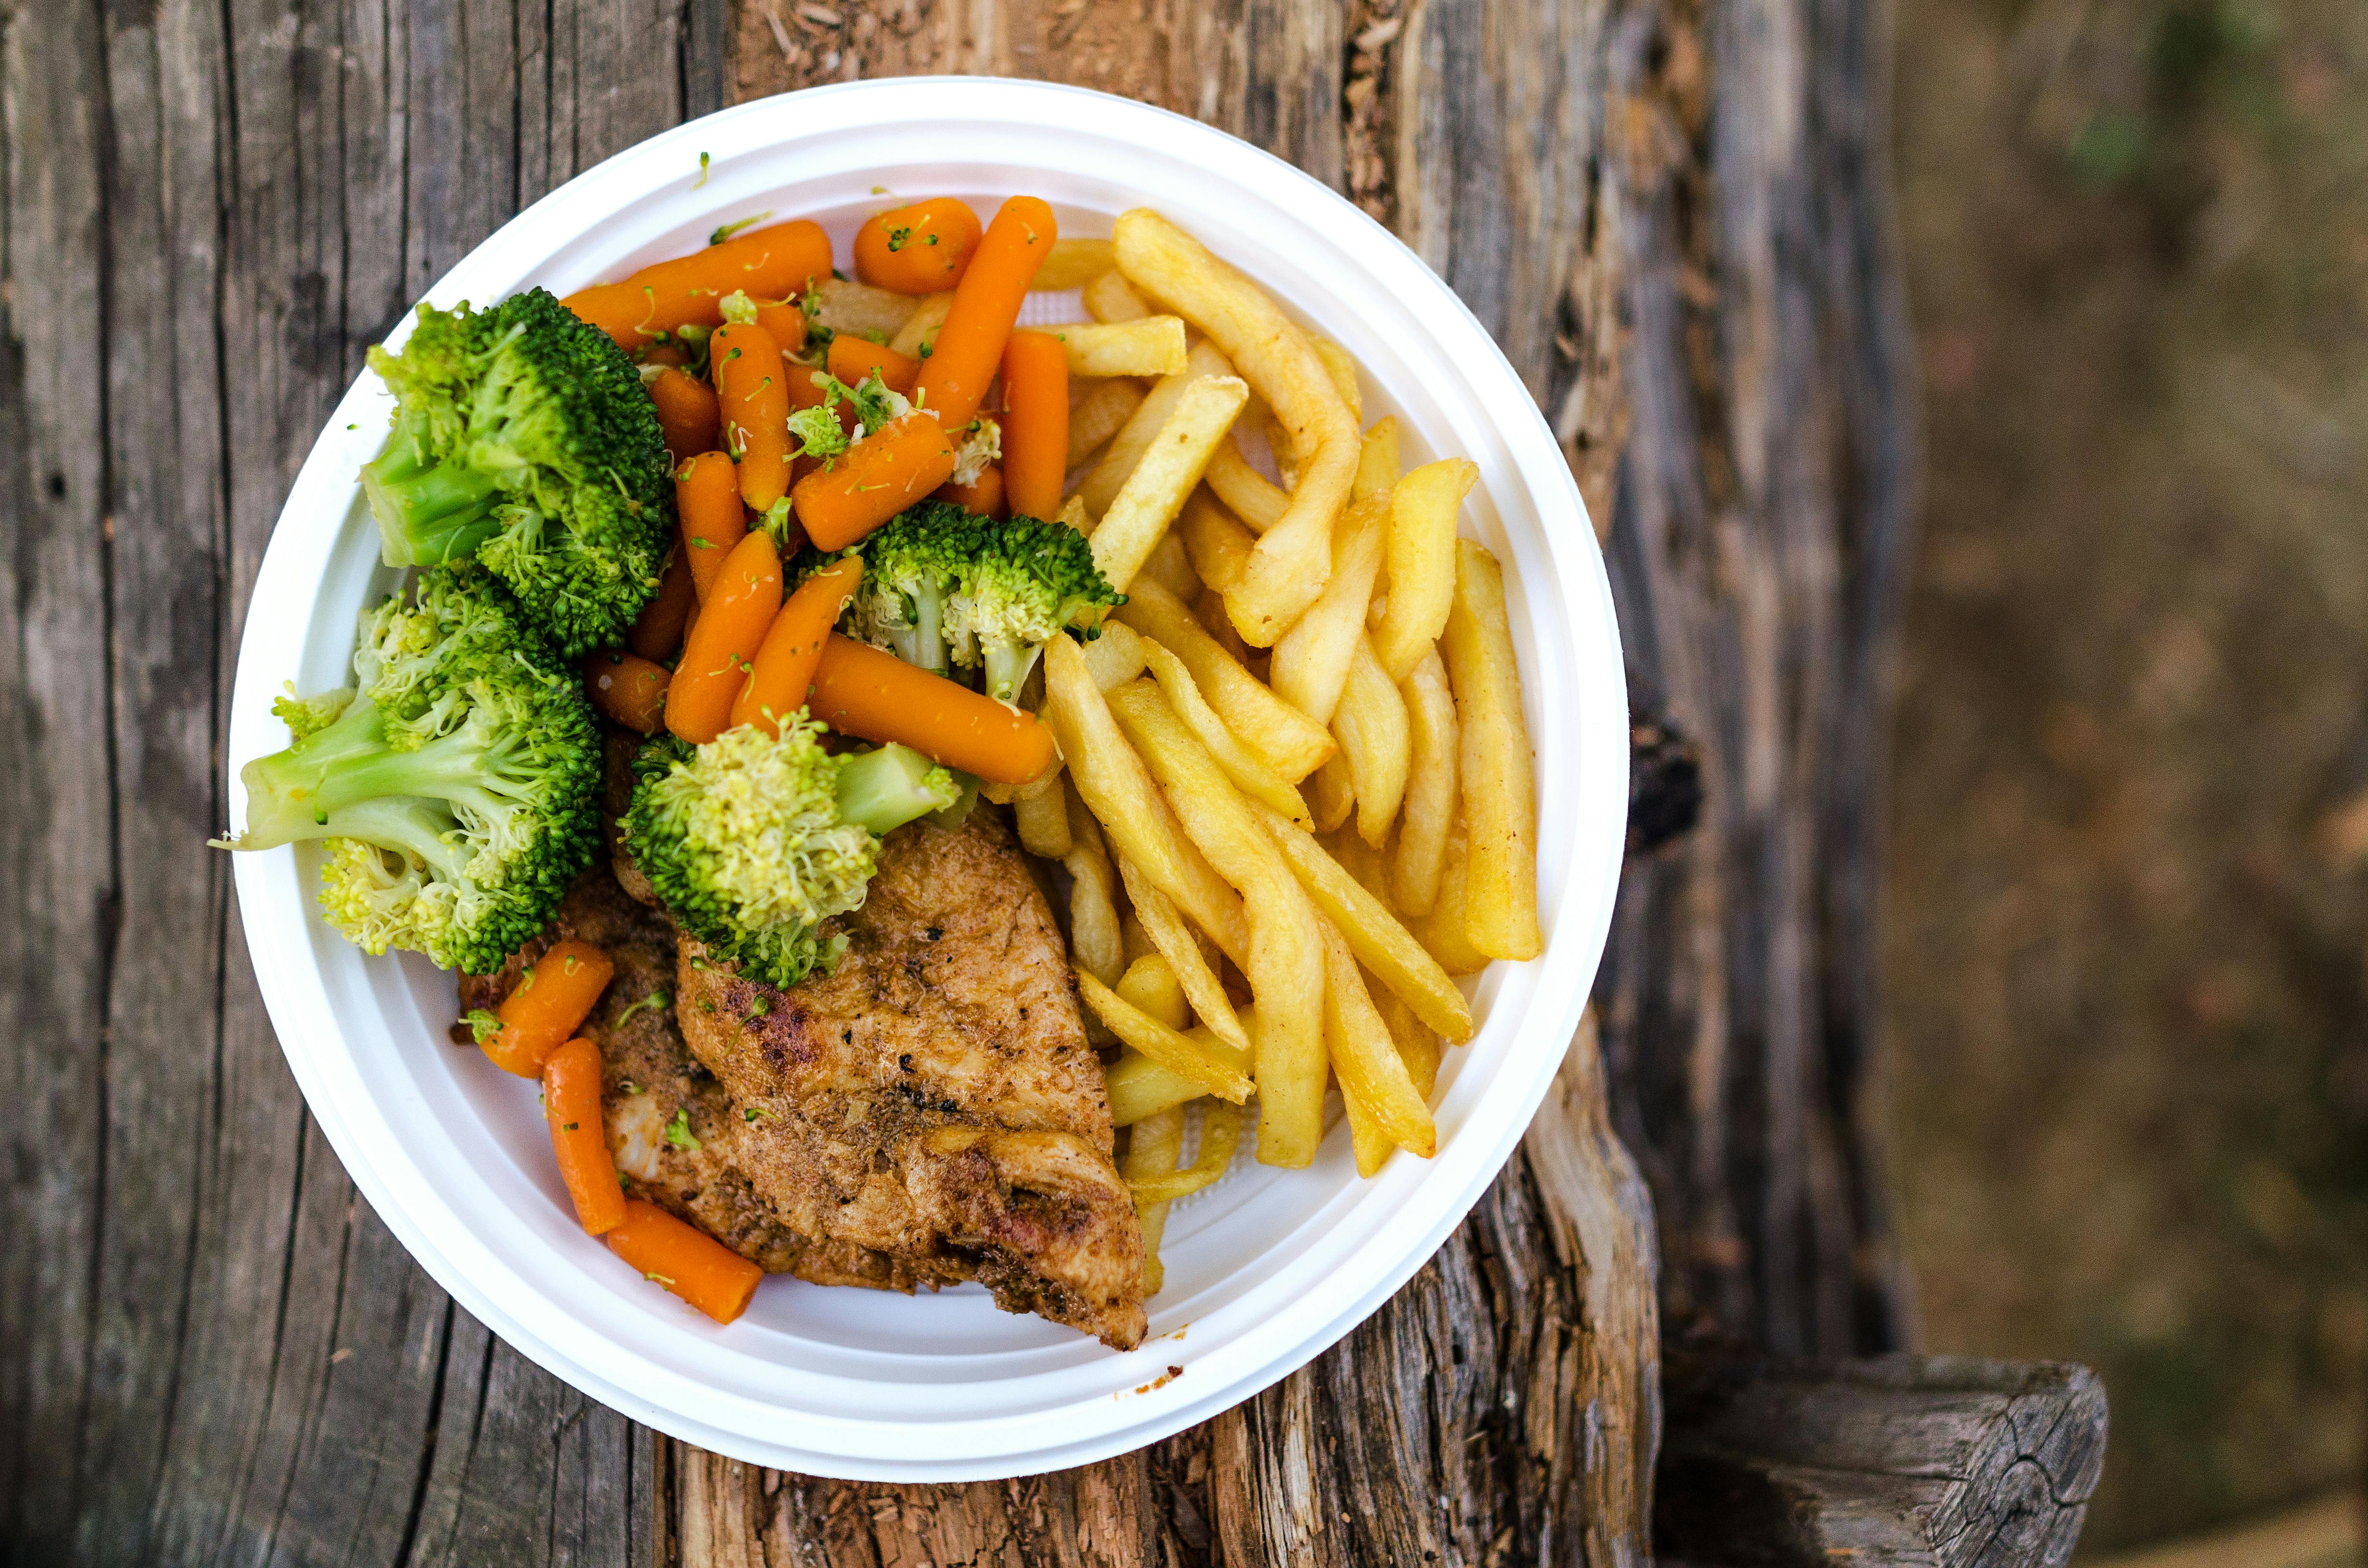 Meat, Broccoli, and Fries Dish